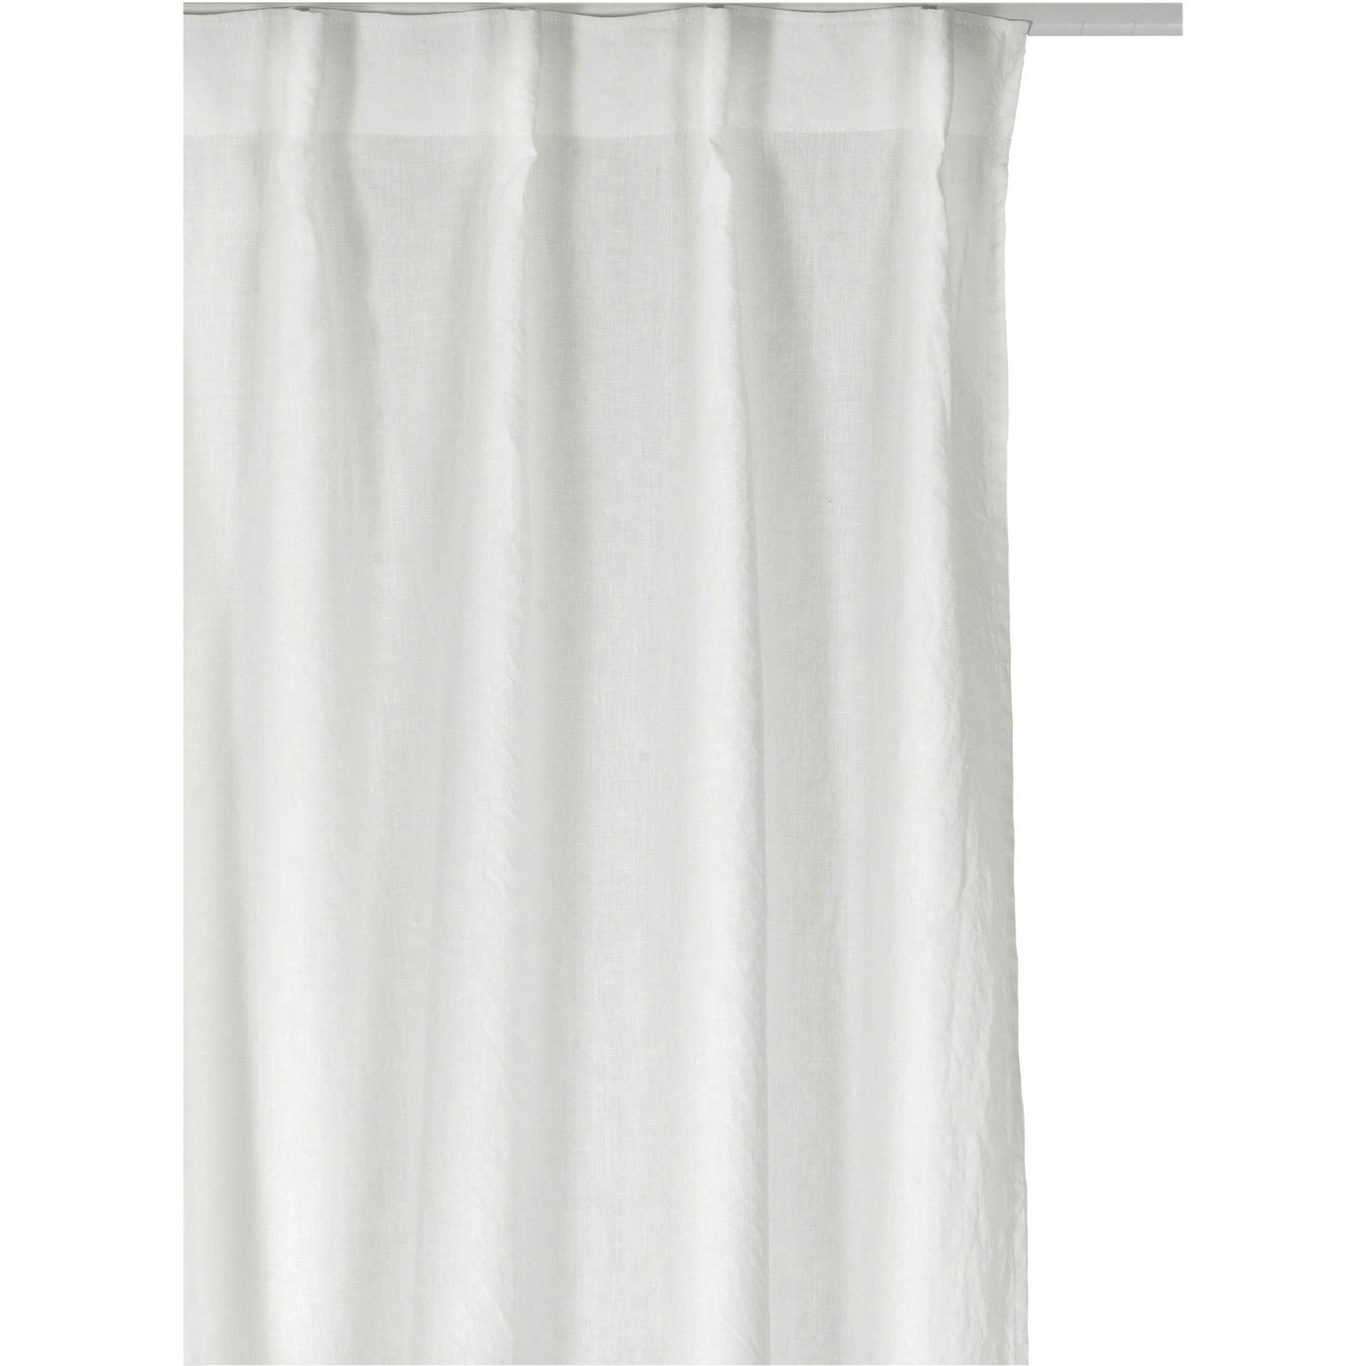 Sunrise Curtain With Pleat Band 140x290 cm, White